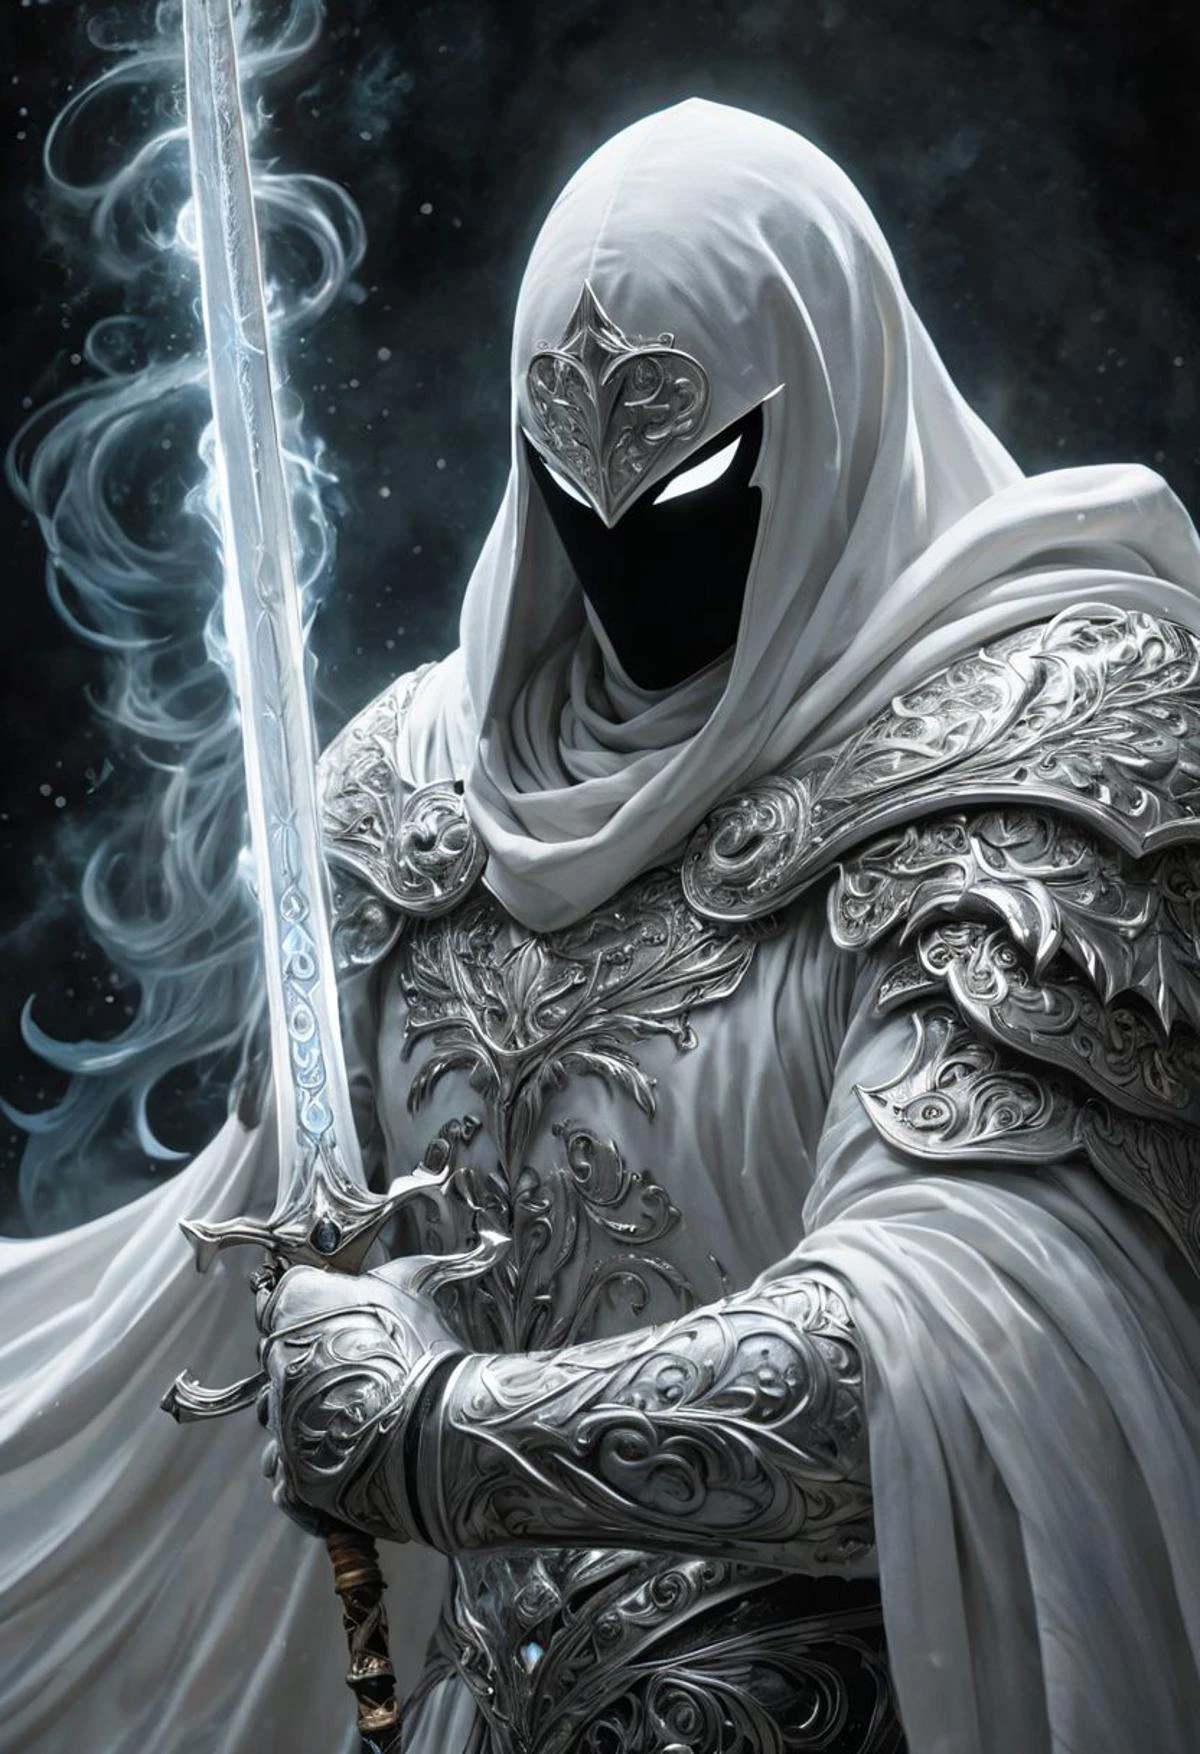 A closeup of fantastical image of a moon knight, clad in flowing, flowing robes, wielding an ornate, ornate blade. Their eyes are filled with power and determination, as they wield the sword in a fluid, dynamic motion. The moon's reflection highlights their magical power